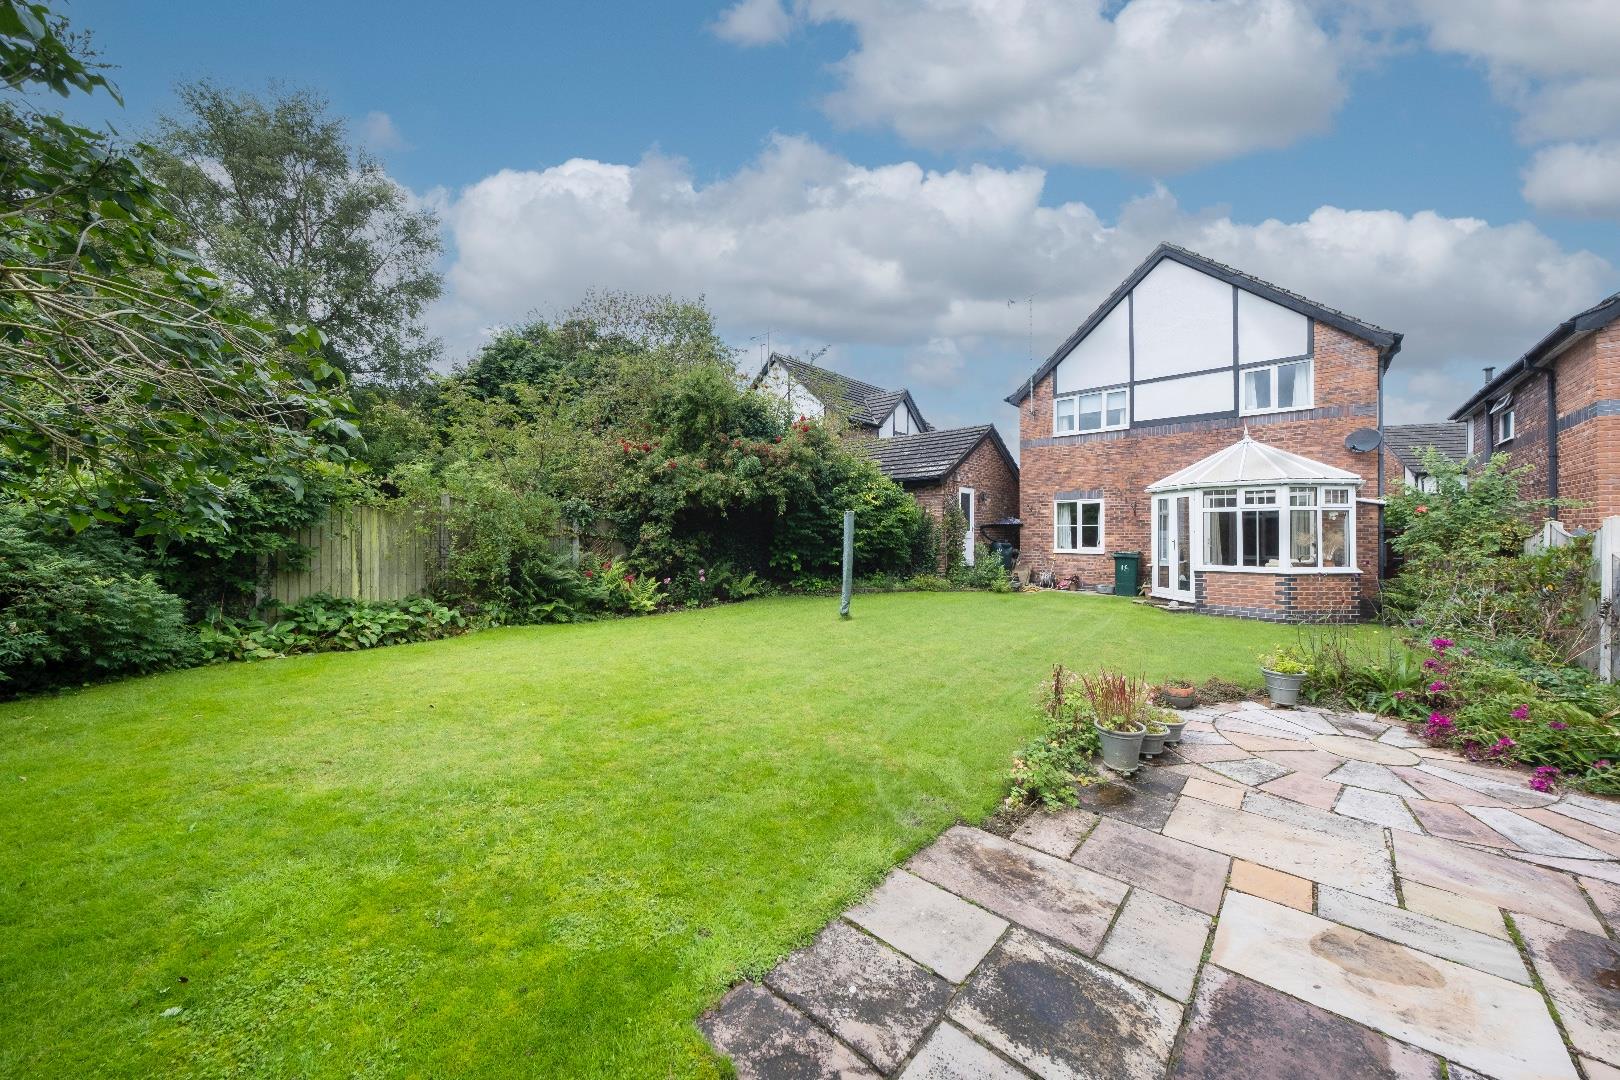 4 bedroom  Detached House for Sale in Tarvin